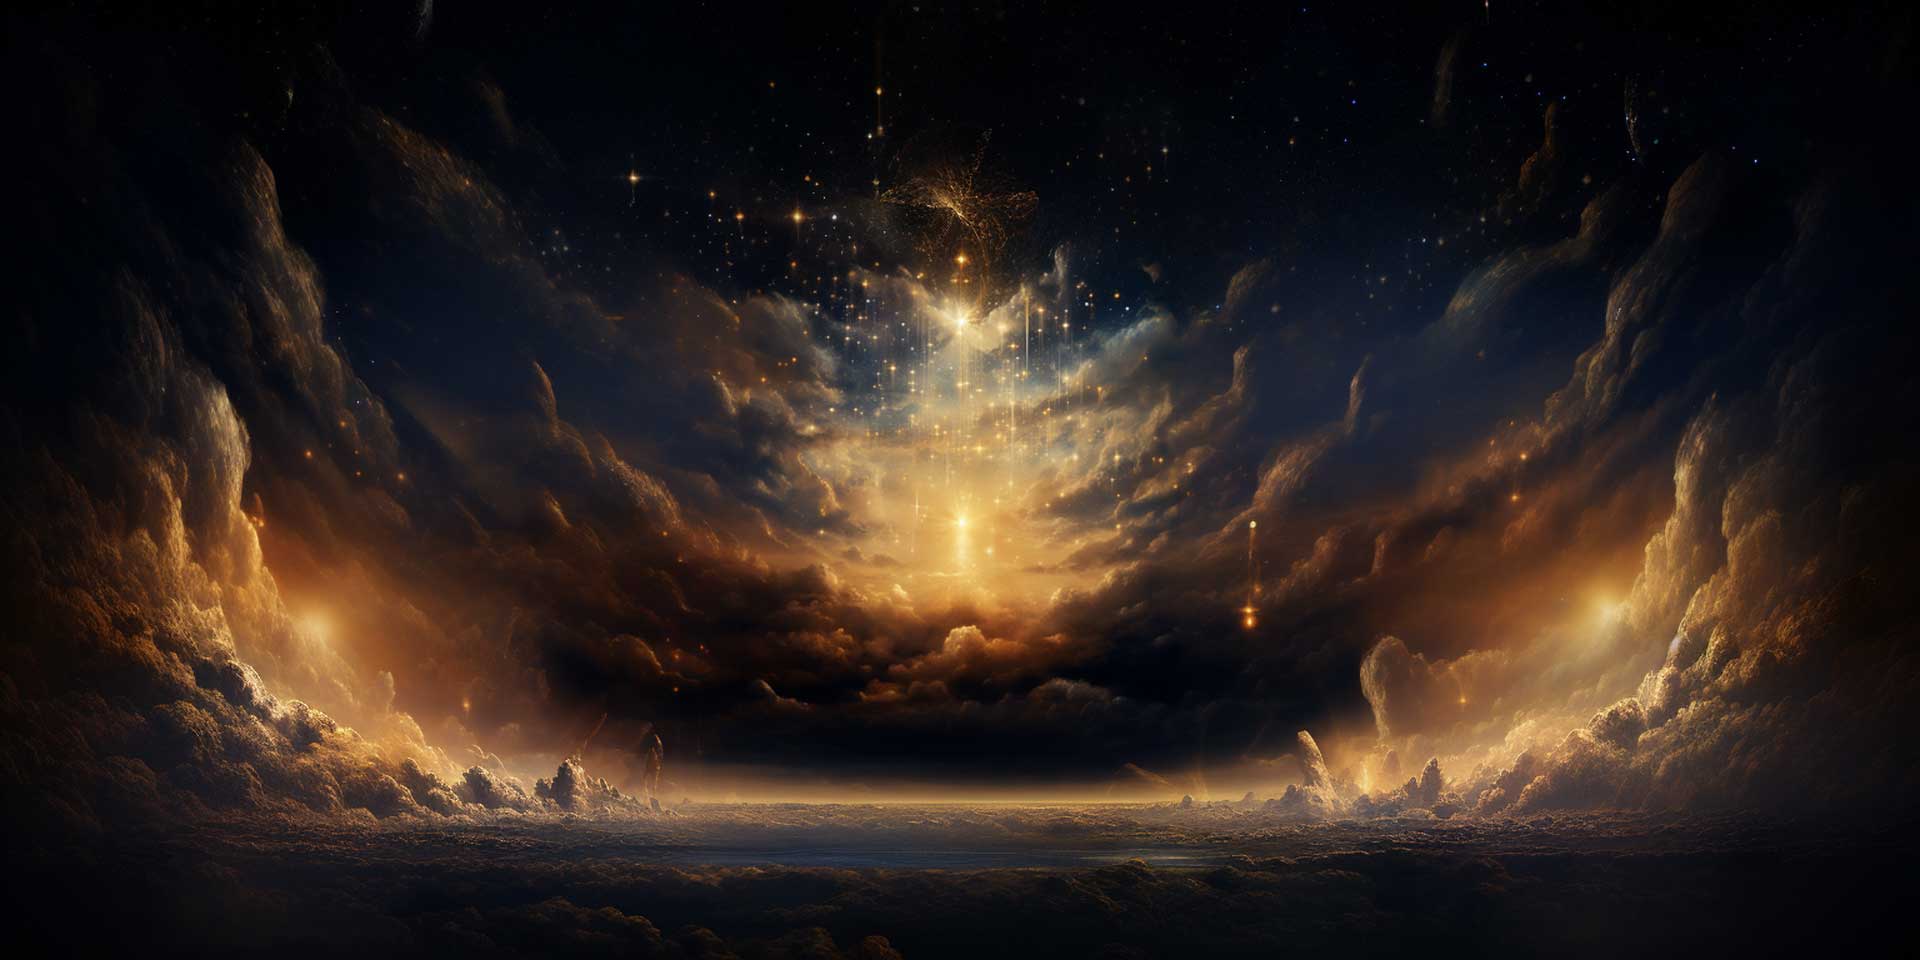 an image of a beautifully clouded celestial sky, filled with stars and golden light orbs. Hint at an angelic scene without including actual angels.